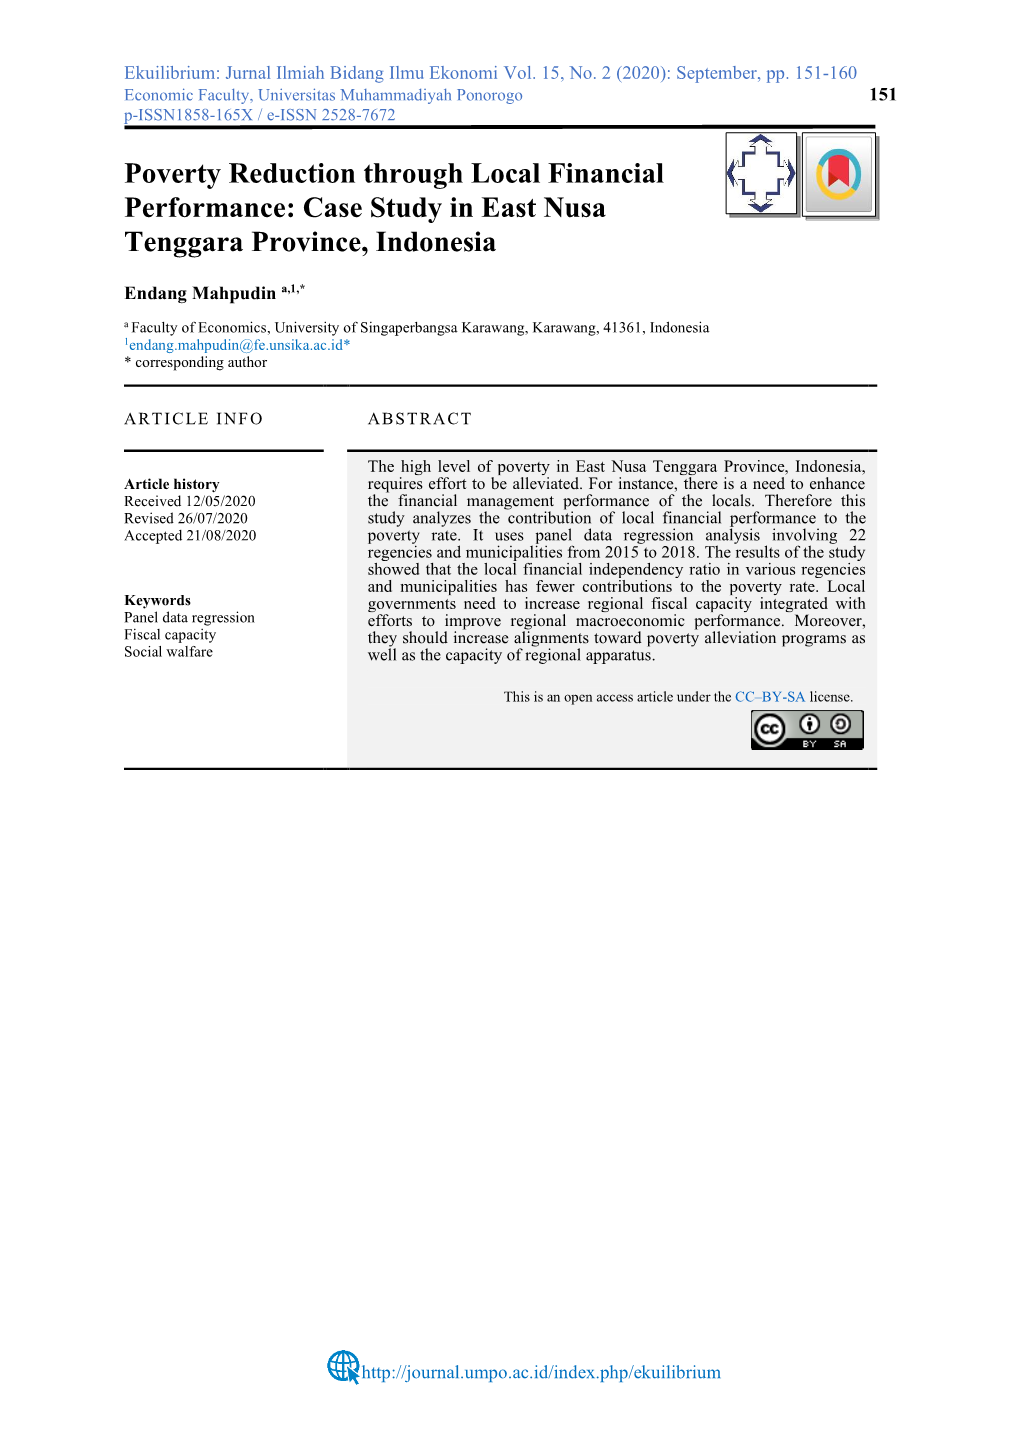 Poverty Reduction Through Local Financial Performance: Case Study in East Nusa Tenggara Province, Indonesia